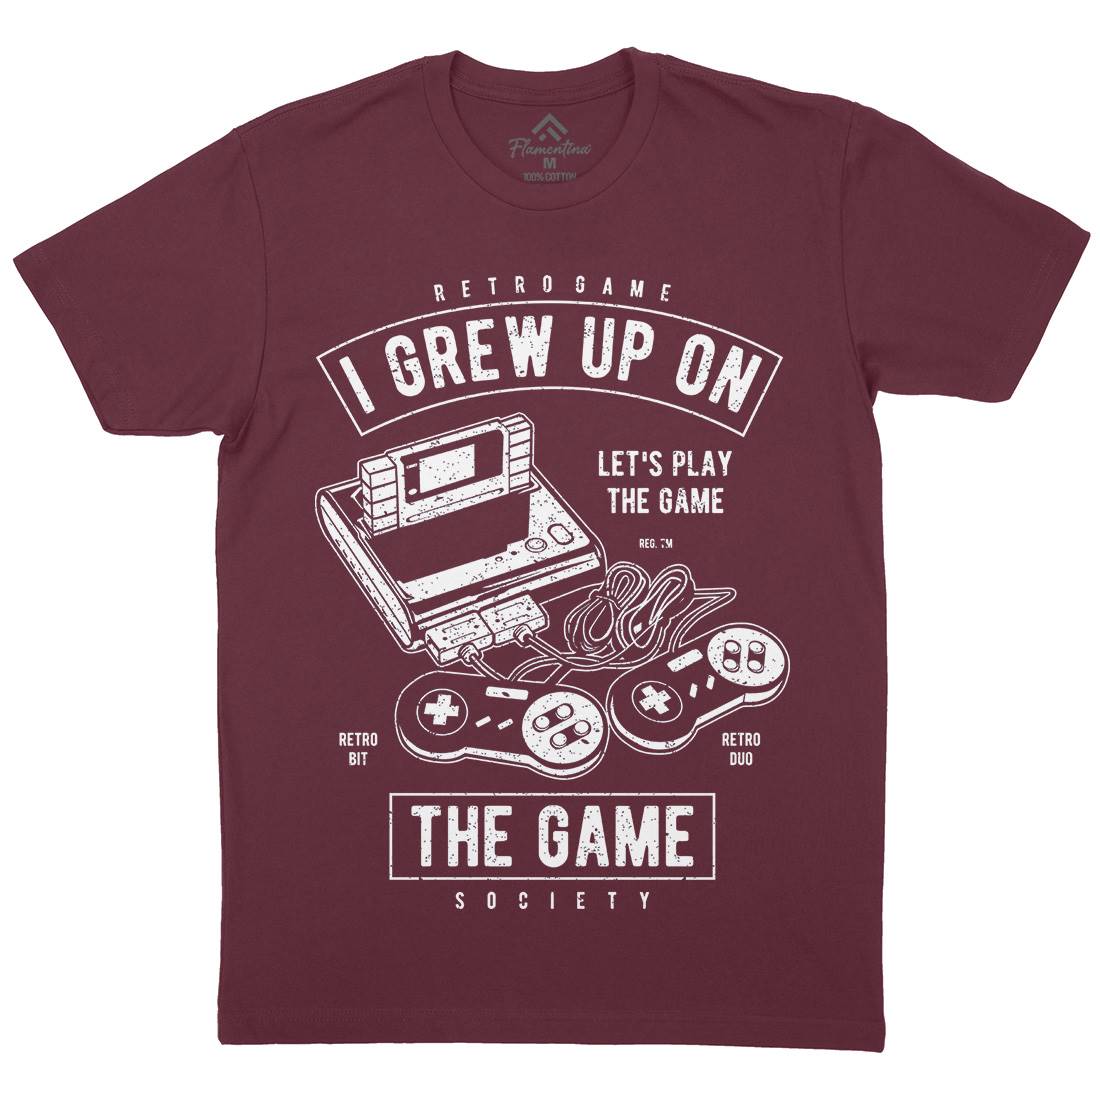 Grew Up On The Game Mens Crew Neck T-Shirt Geek A679